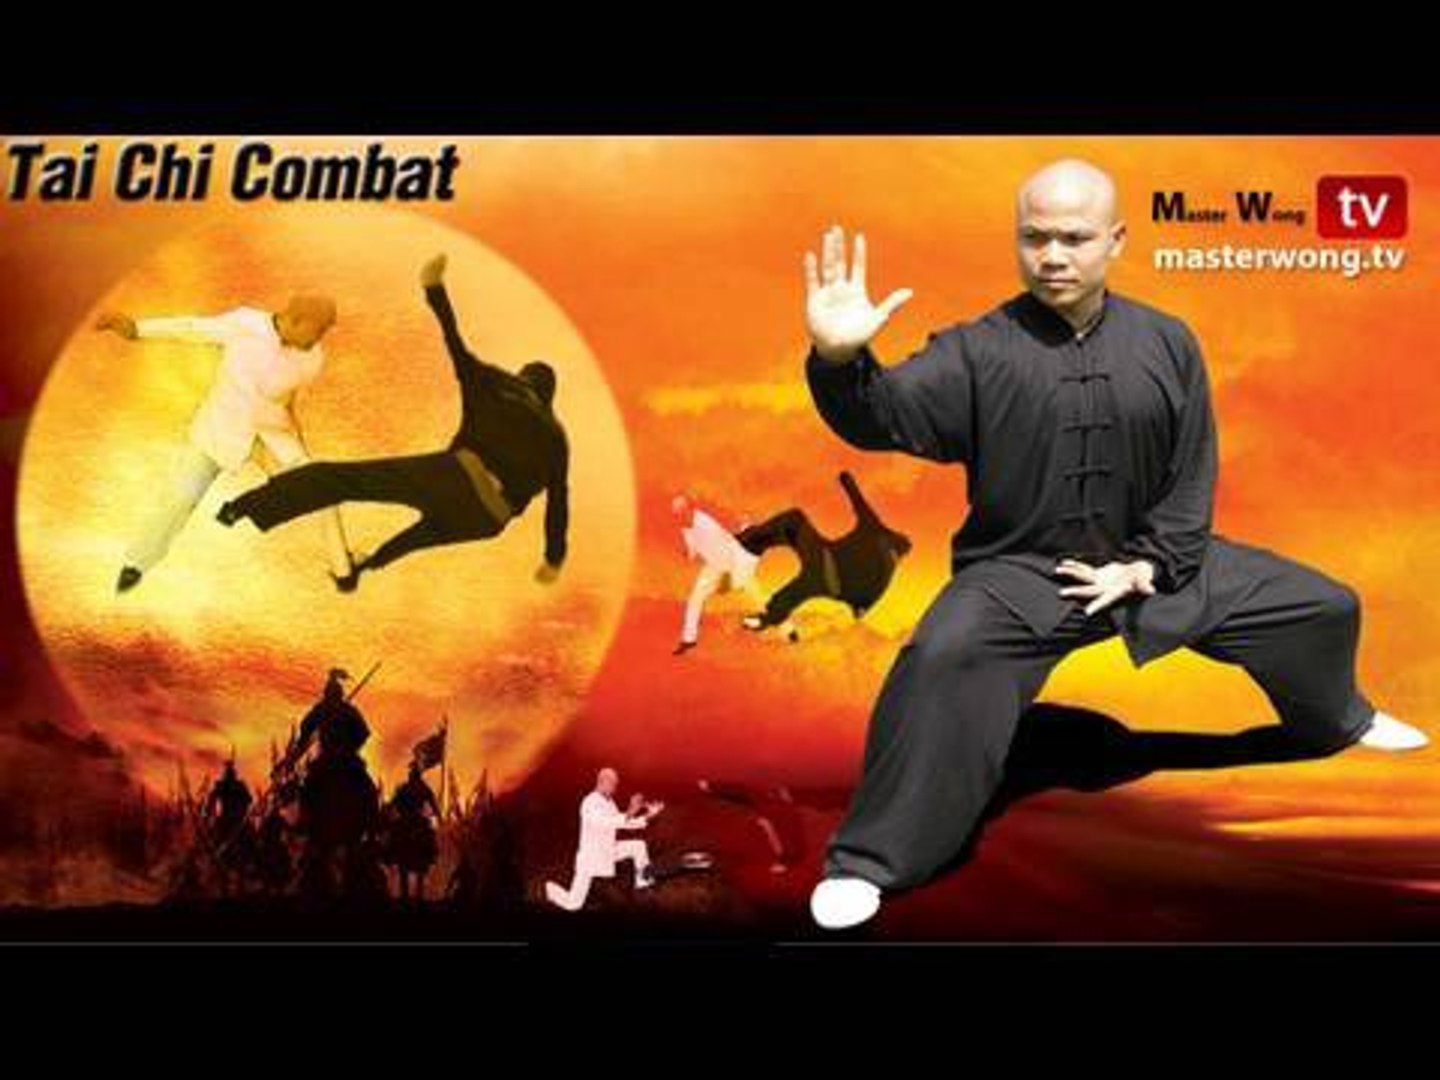 Combat Tai Chi video preview - video Dailymotion